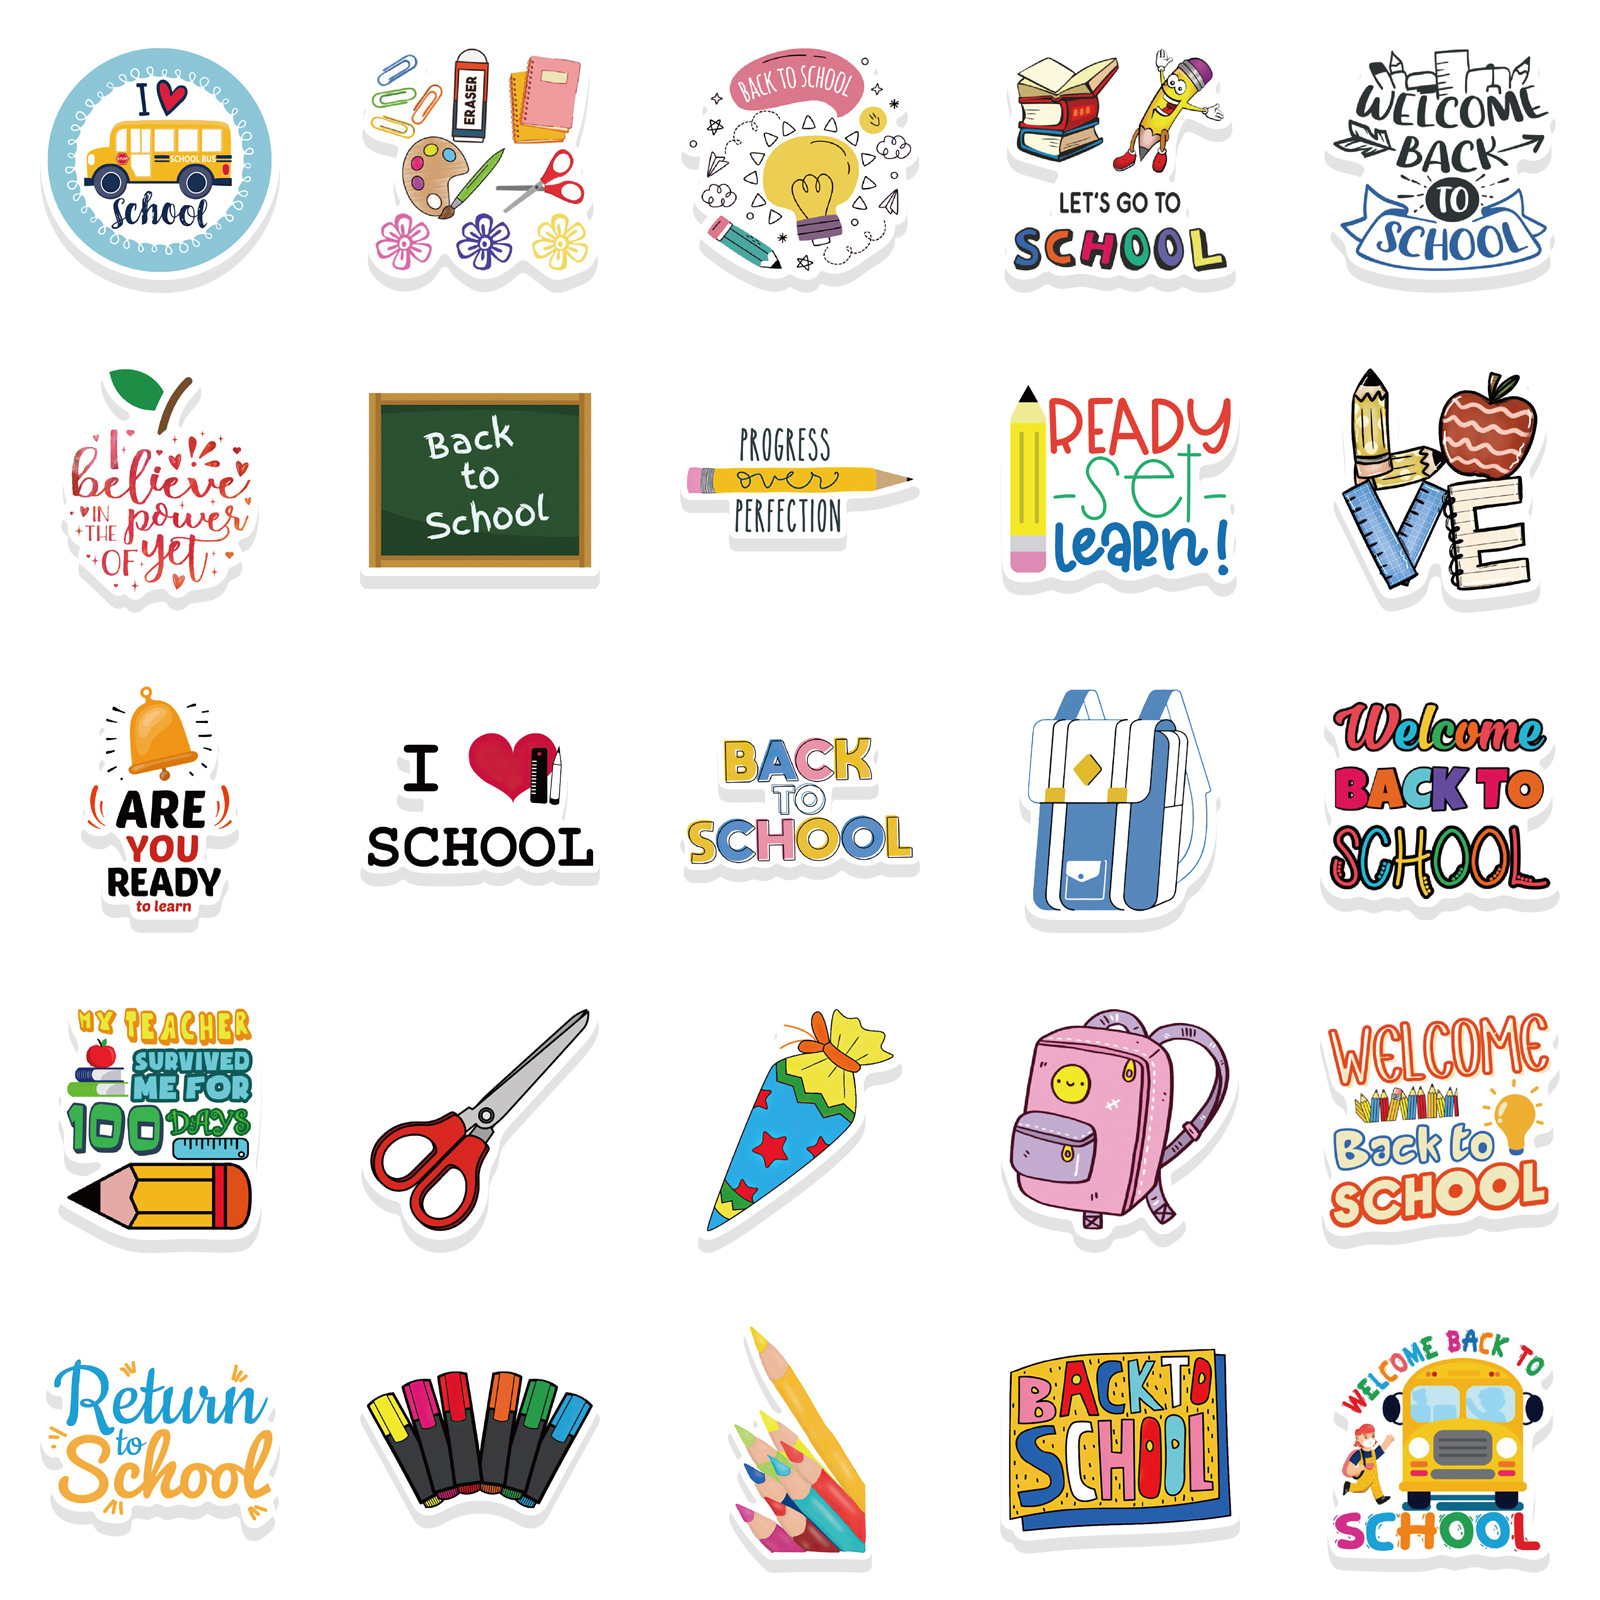 50PCS Cute Danish Pastel Stickers Preppy Stickers Aesthetics Pastel  Stickers Vinyl Waterproof Stickers For Water  Bottle,Computer,Laptop,Phone,Luggage,Notebook